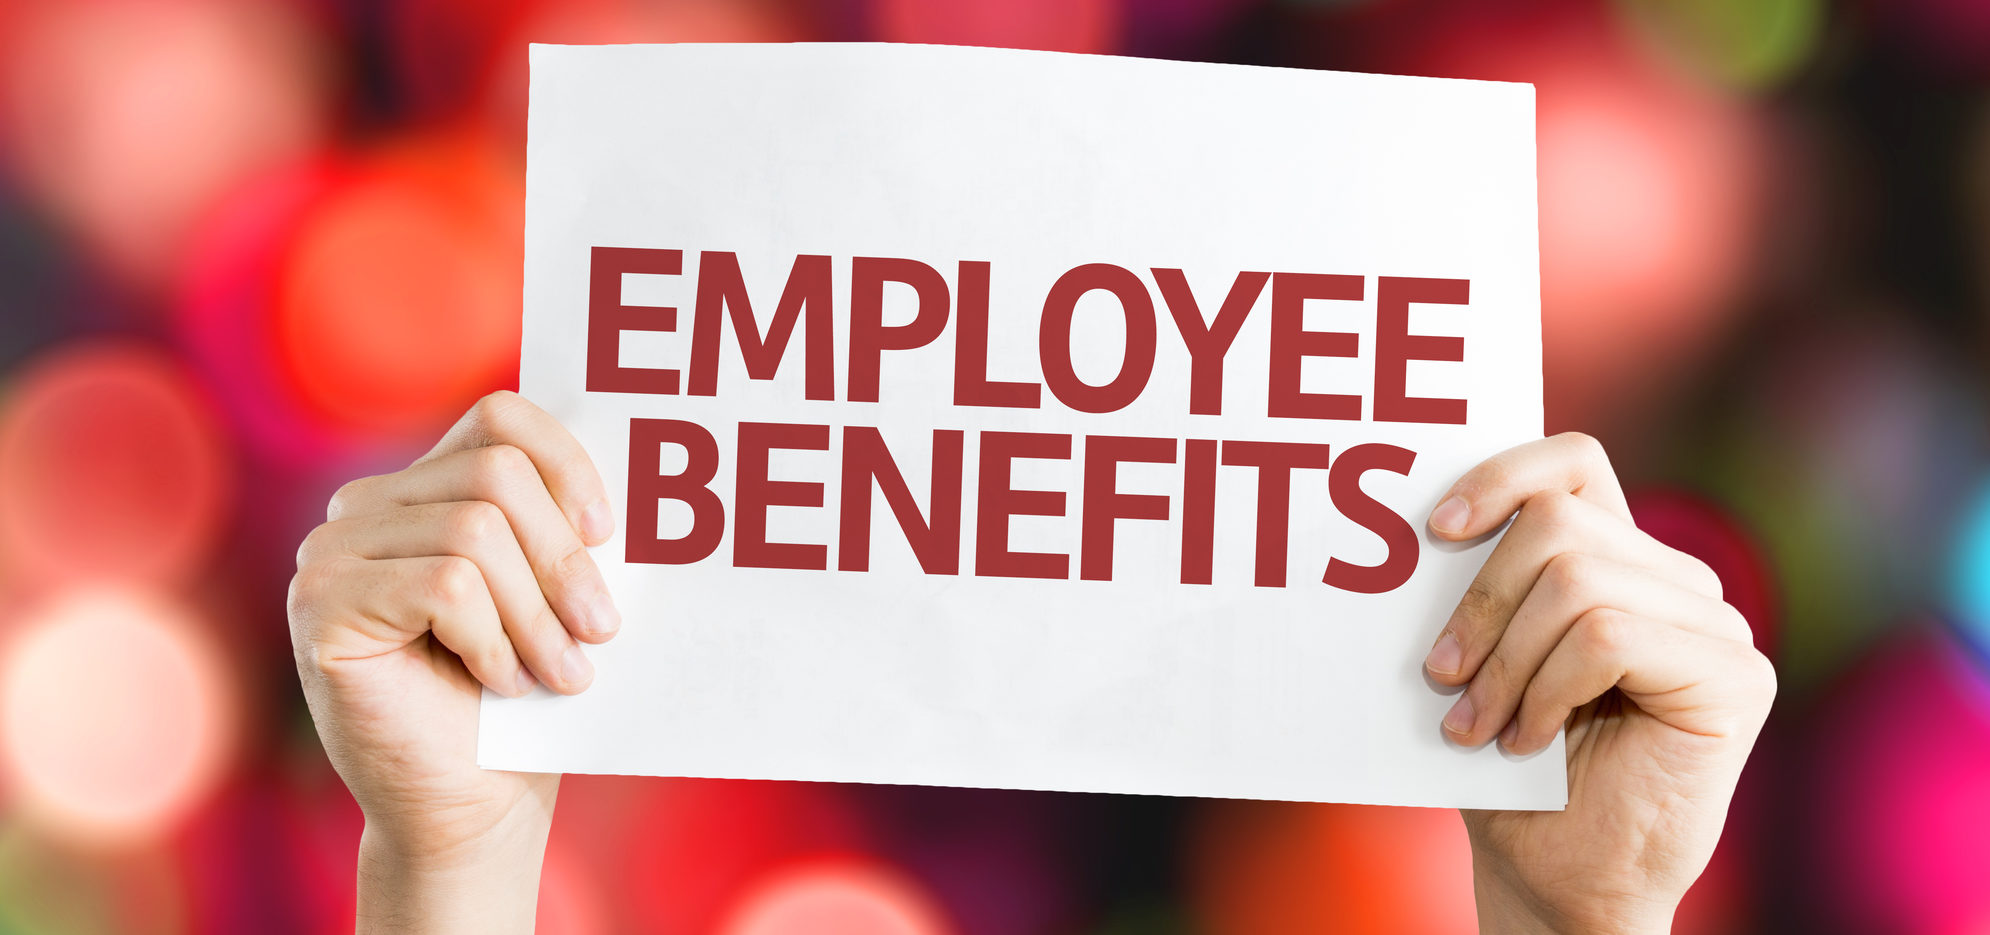 5 Employee Benefits that Help You Attract Top Talent